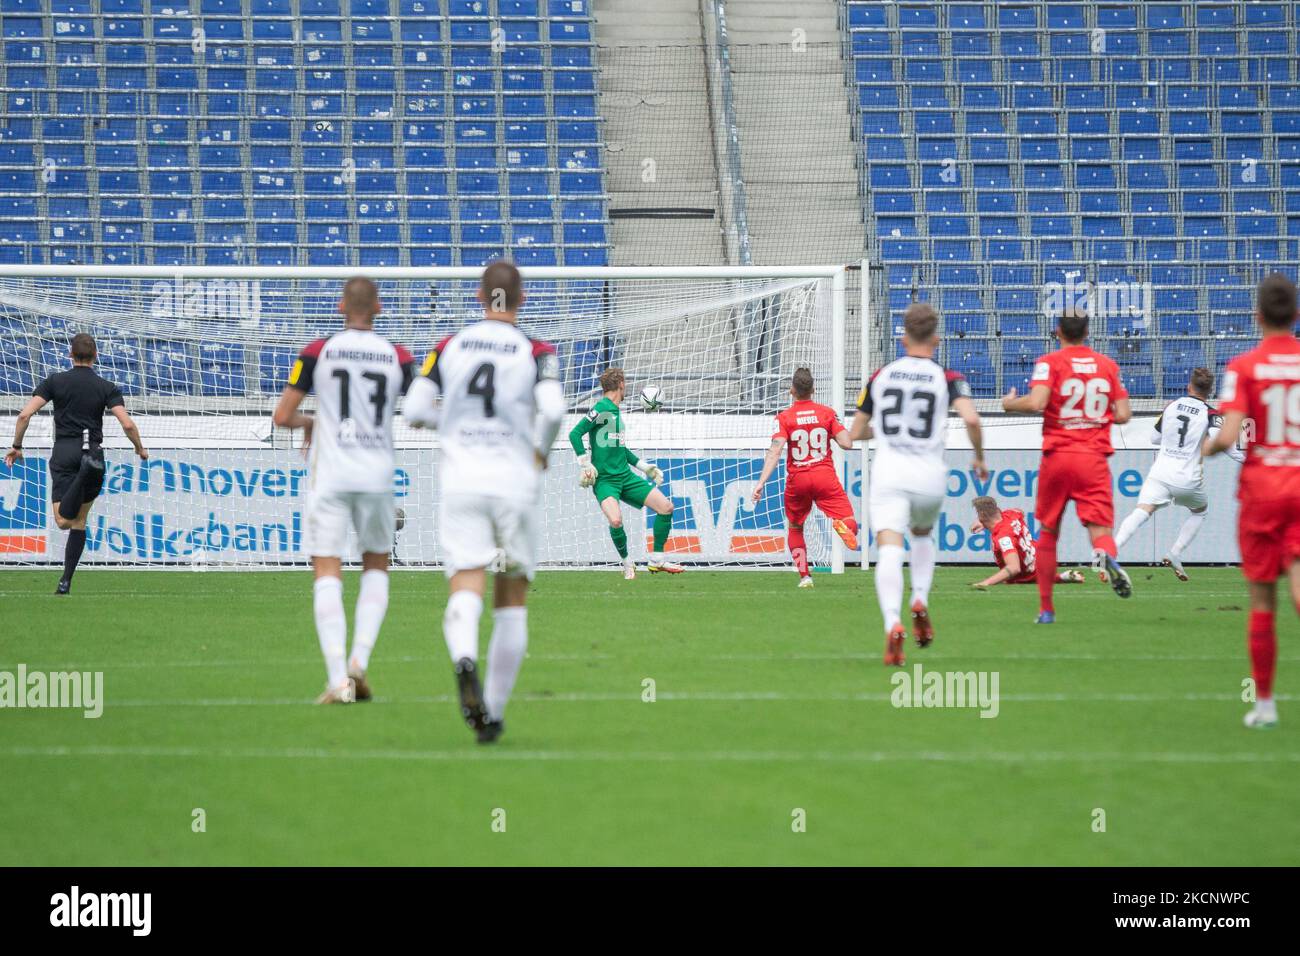 Marlon Ritter (second from right) of 1.FC Kaiserslautern scores his team's first goal during the 3. Liga match between TSV Havelse and 1.FC Kaiserslautern at HDI-Arena on October 02, 2021 in Hanover, Germany. (Photo by Peter Niedung/NurPhoto) Stock Photo